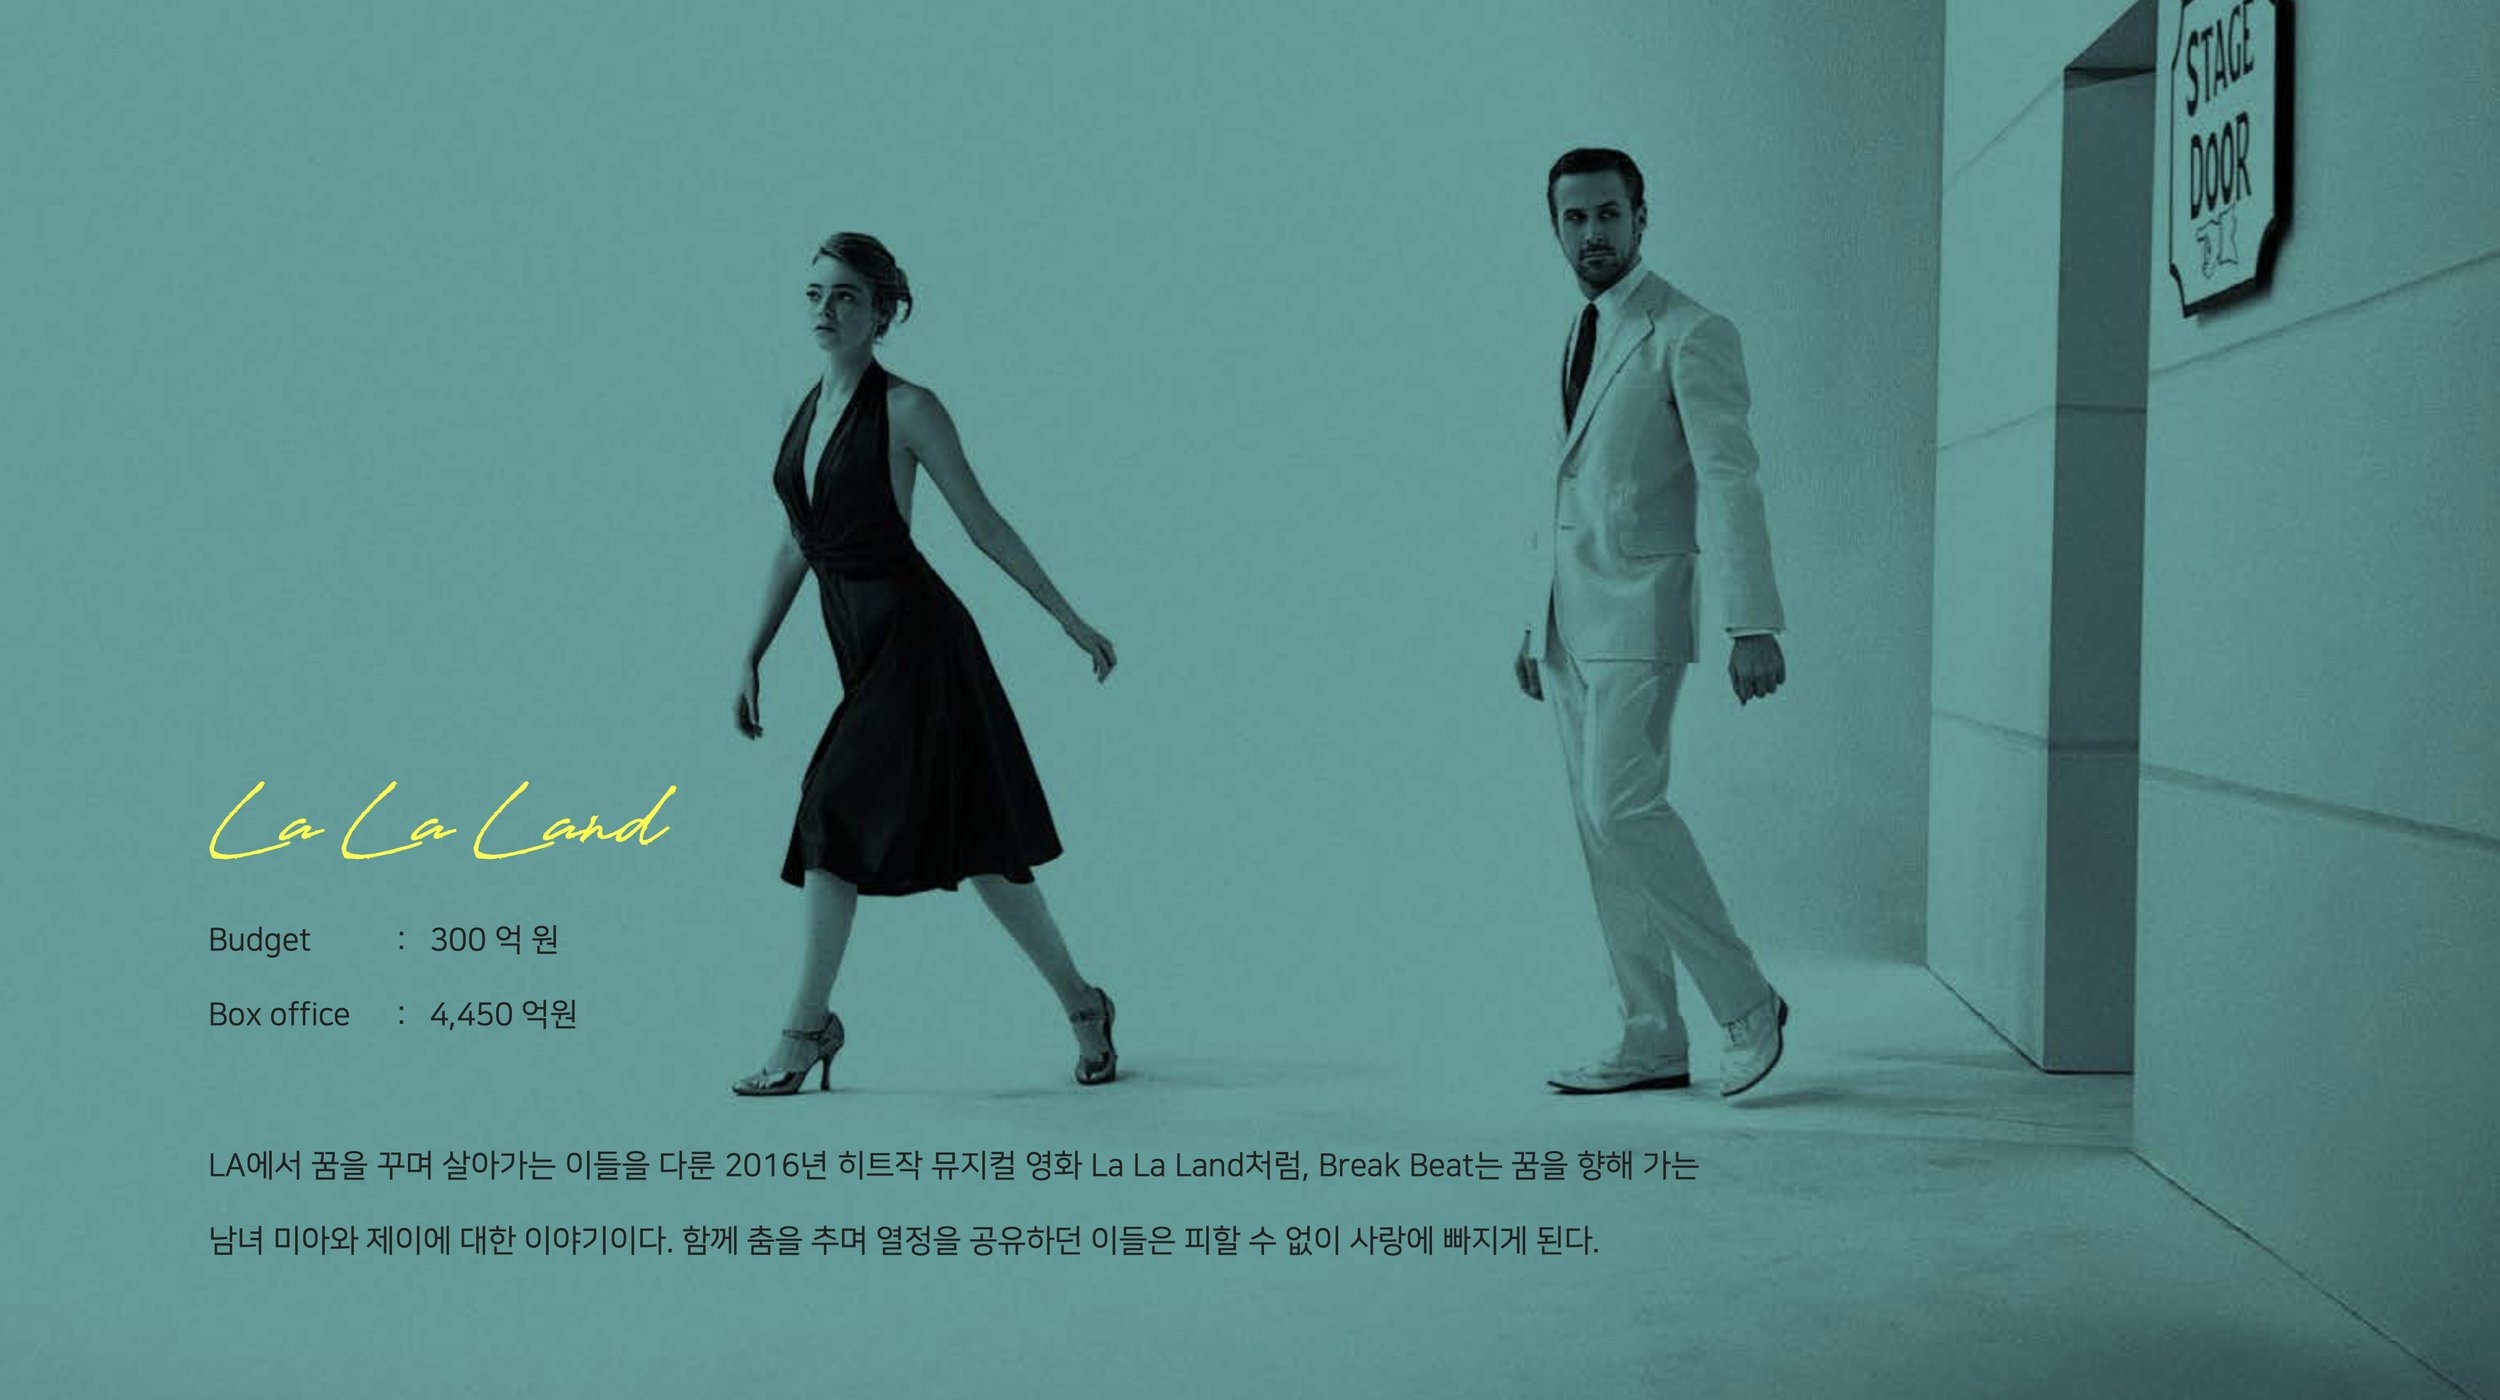 High Water Studios | Trustworthy Local Production Company in Seoul, South Korea.